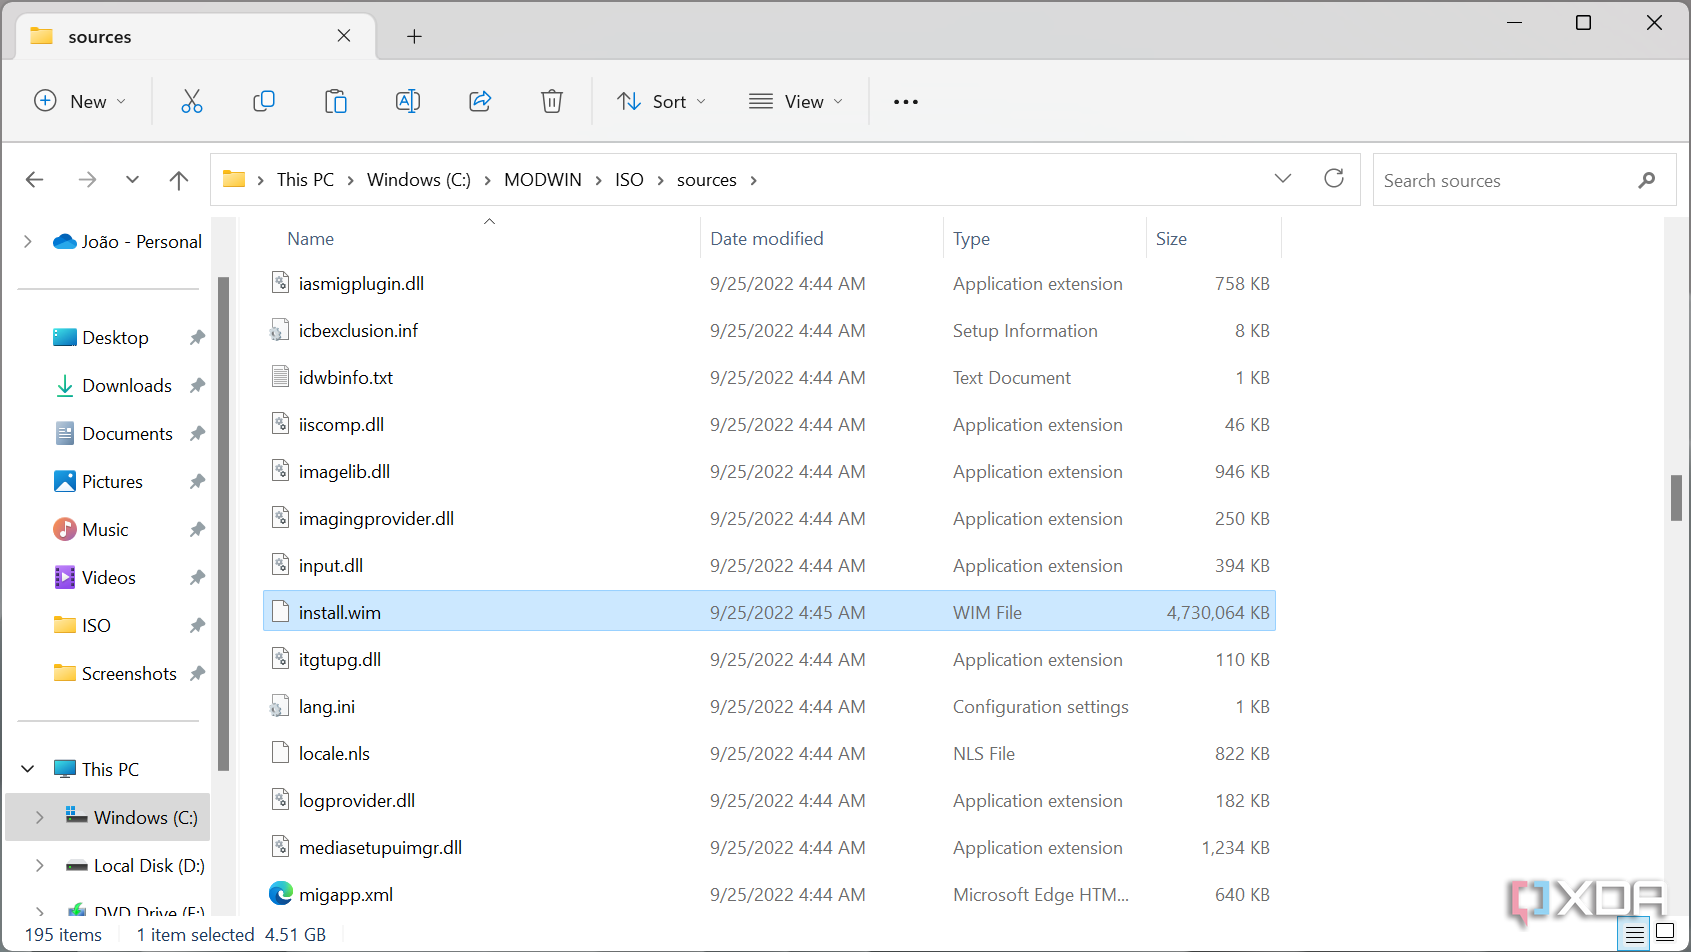 Screenshot of File Explorer showing a folder with various files, including one called install.wim